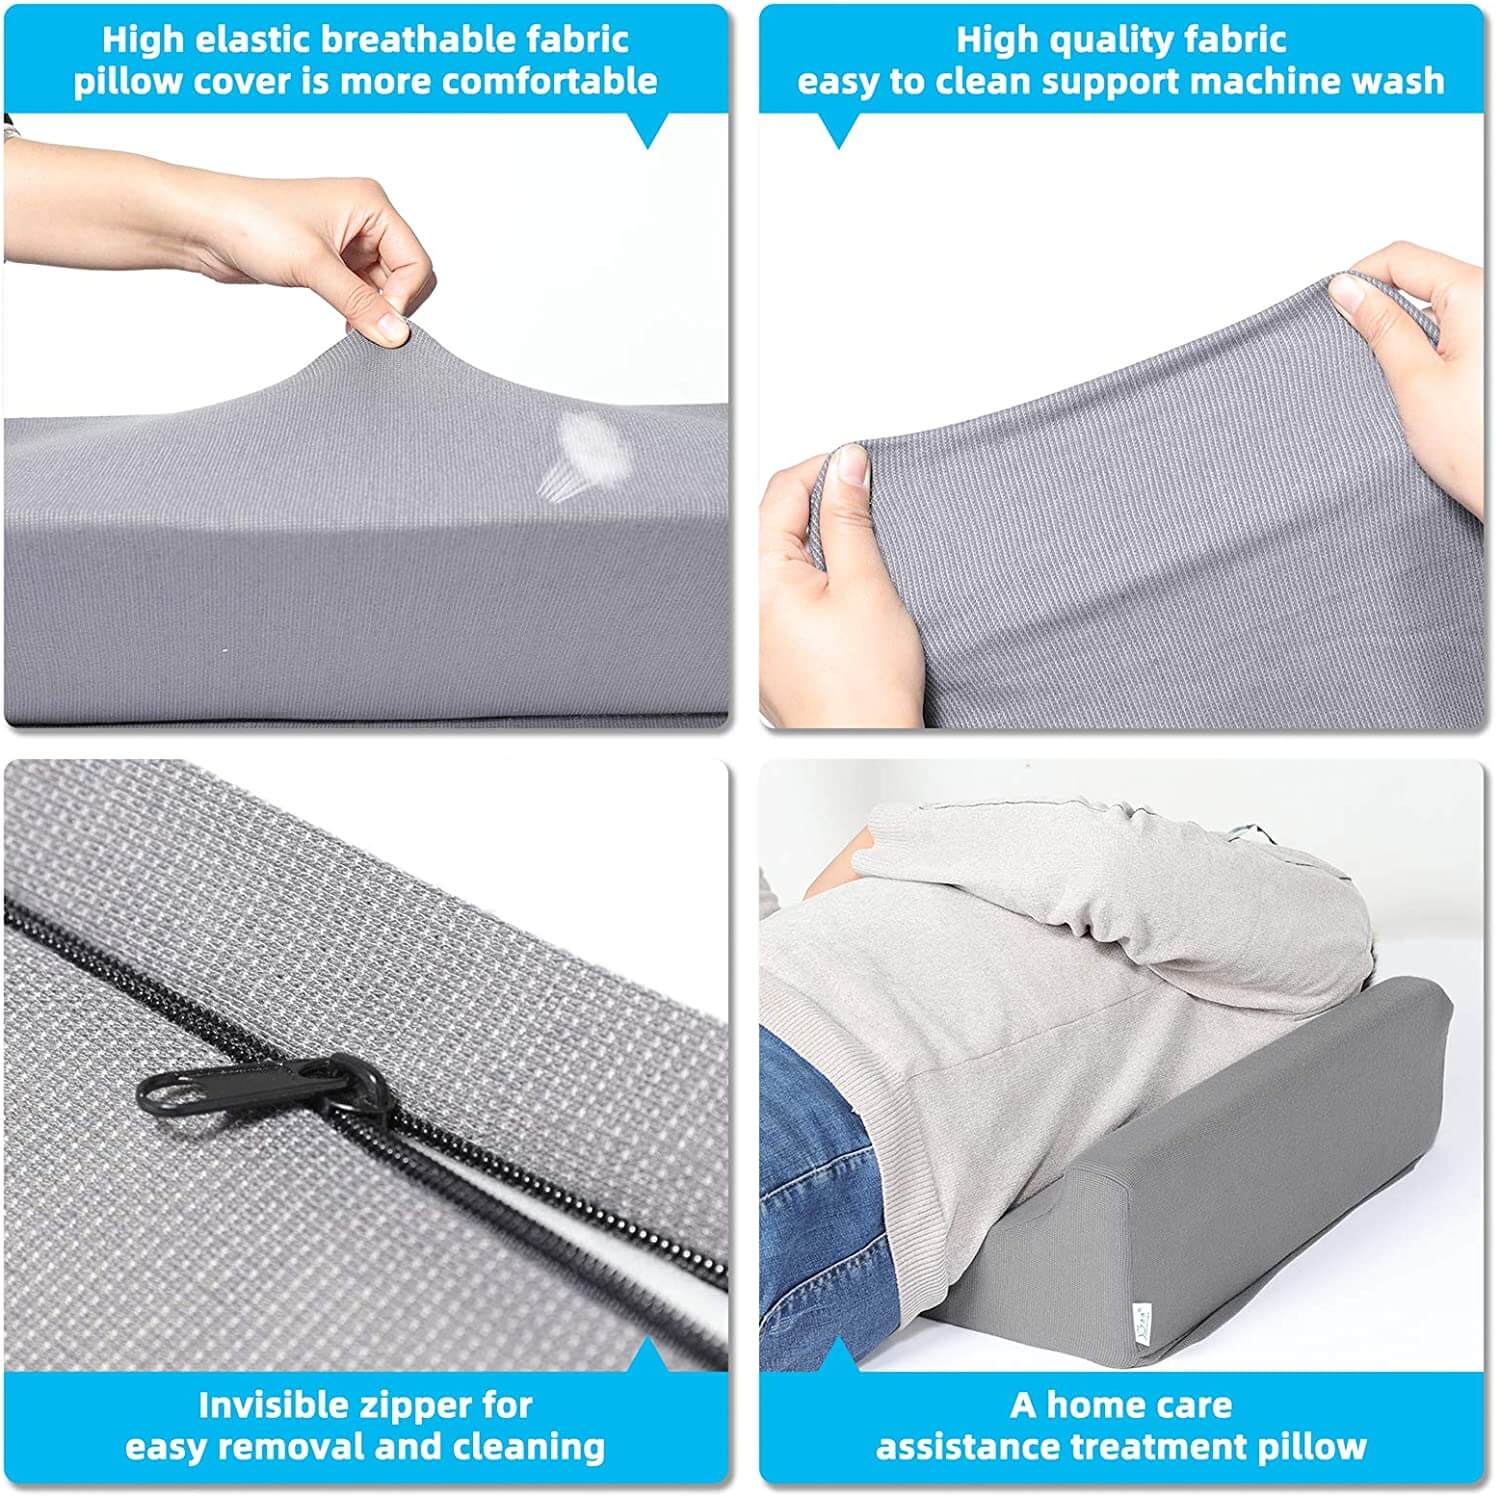 Leg Elevation Pillow,Inflatable Wedge Pillows,Comfort Leg Pillows for  Sleeping,Improve Circulataion and Reduce Swelling,Suitable for improving  Sleep Quality,Pregnant,Surgery and Injury,Recovery (Grey)